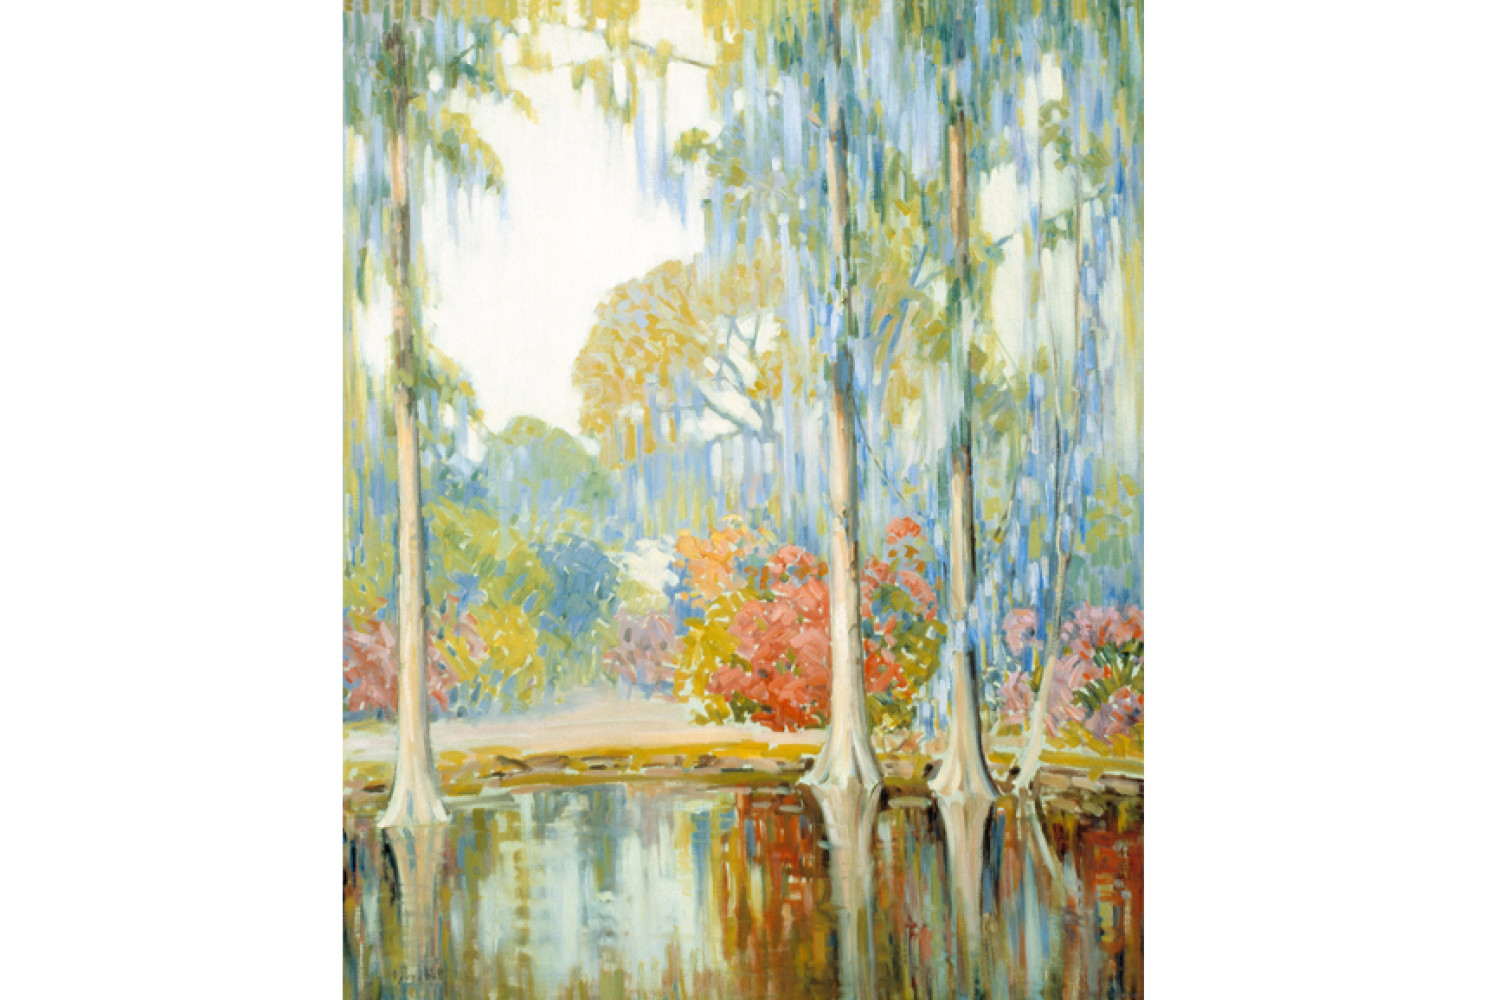 Magnolia Gardens, ca. 1920
By Alfred Hutty (American, 1877 - 1954); oil on canvas; 39 7/8 x 31 3/4 inches; Museum purchase from the artist; 1920.006.0001